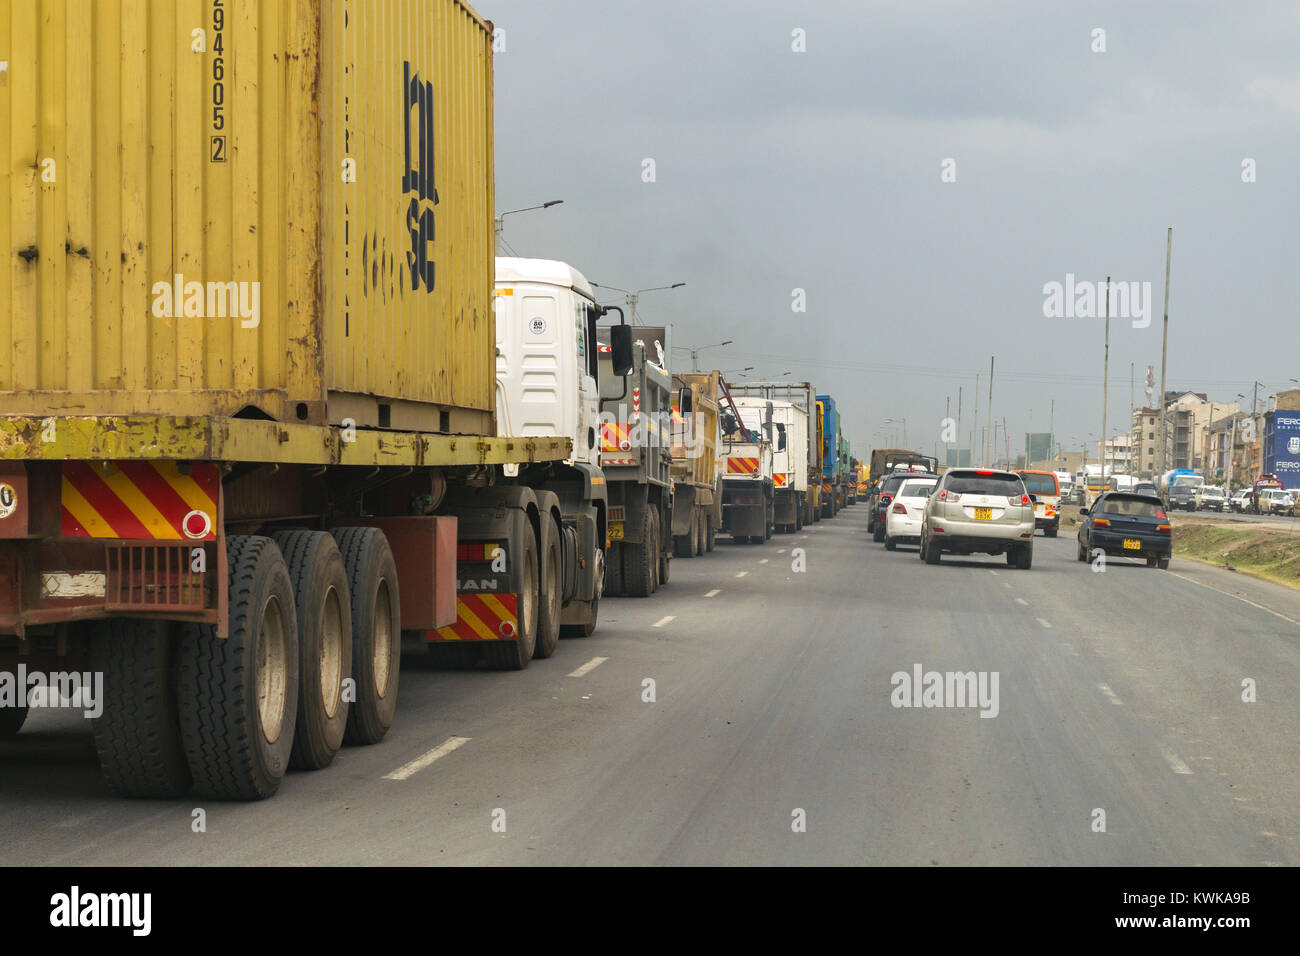 A long line of trucks and lorries queue on Mombasa Road as they wait to use a weighbridge further along the road, Kenya, East Africa Stock Photo